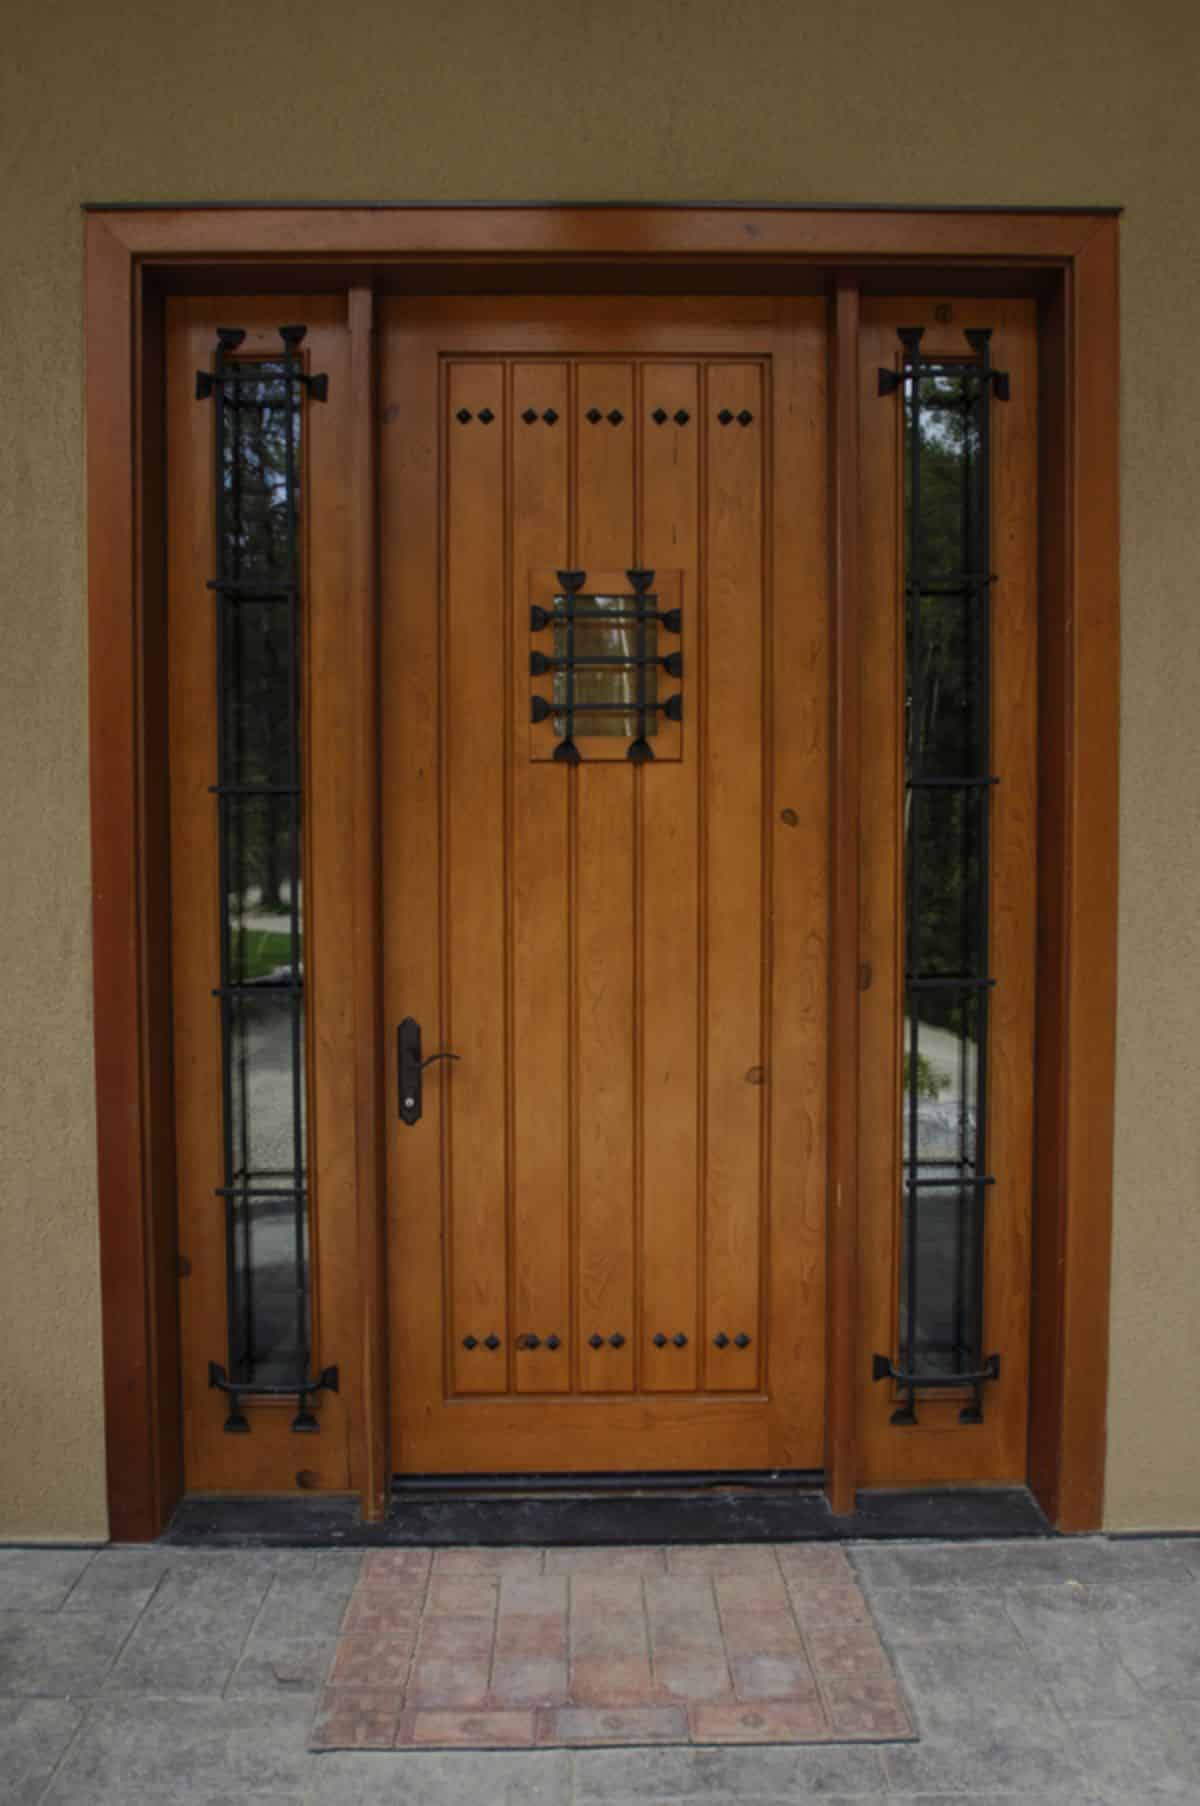 wood door with glass panels on sides and wrought iron additions